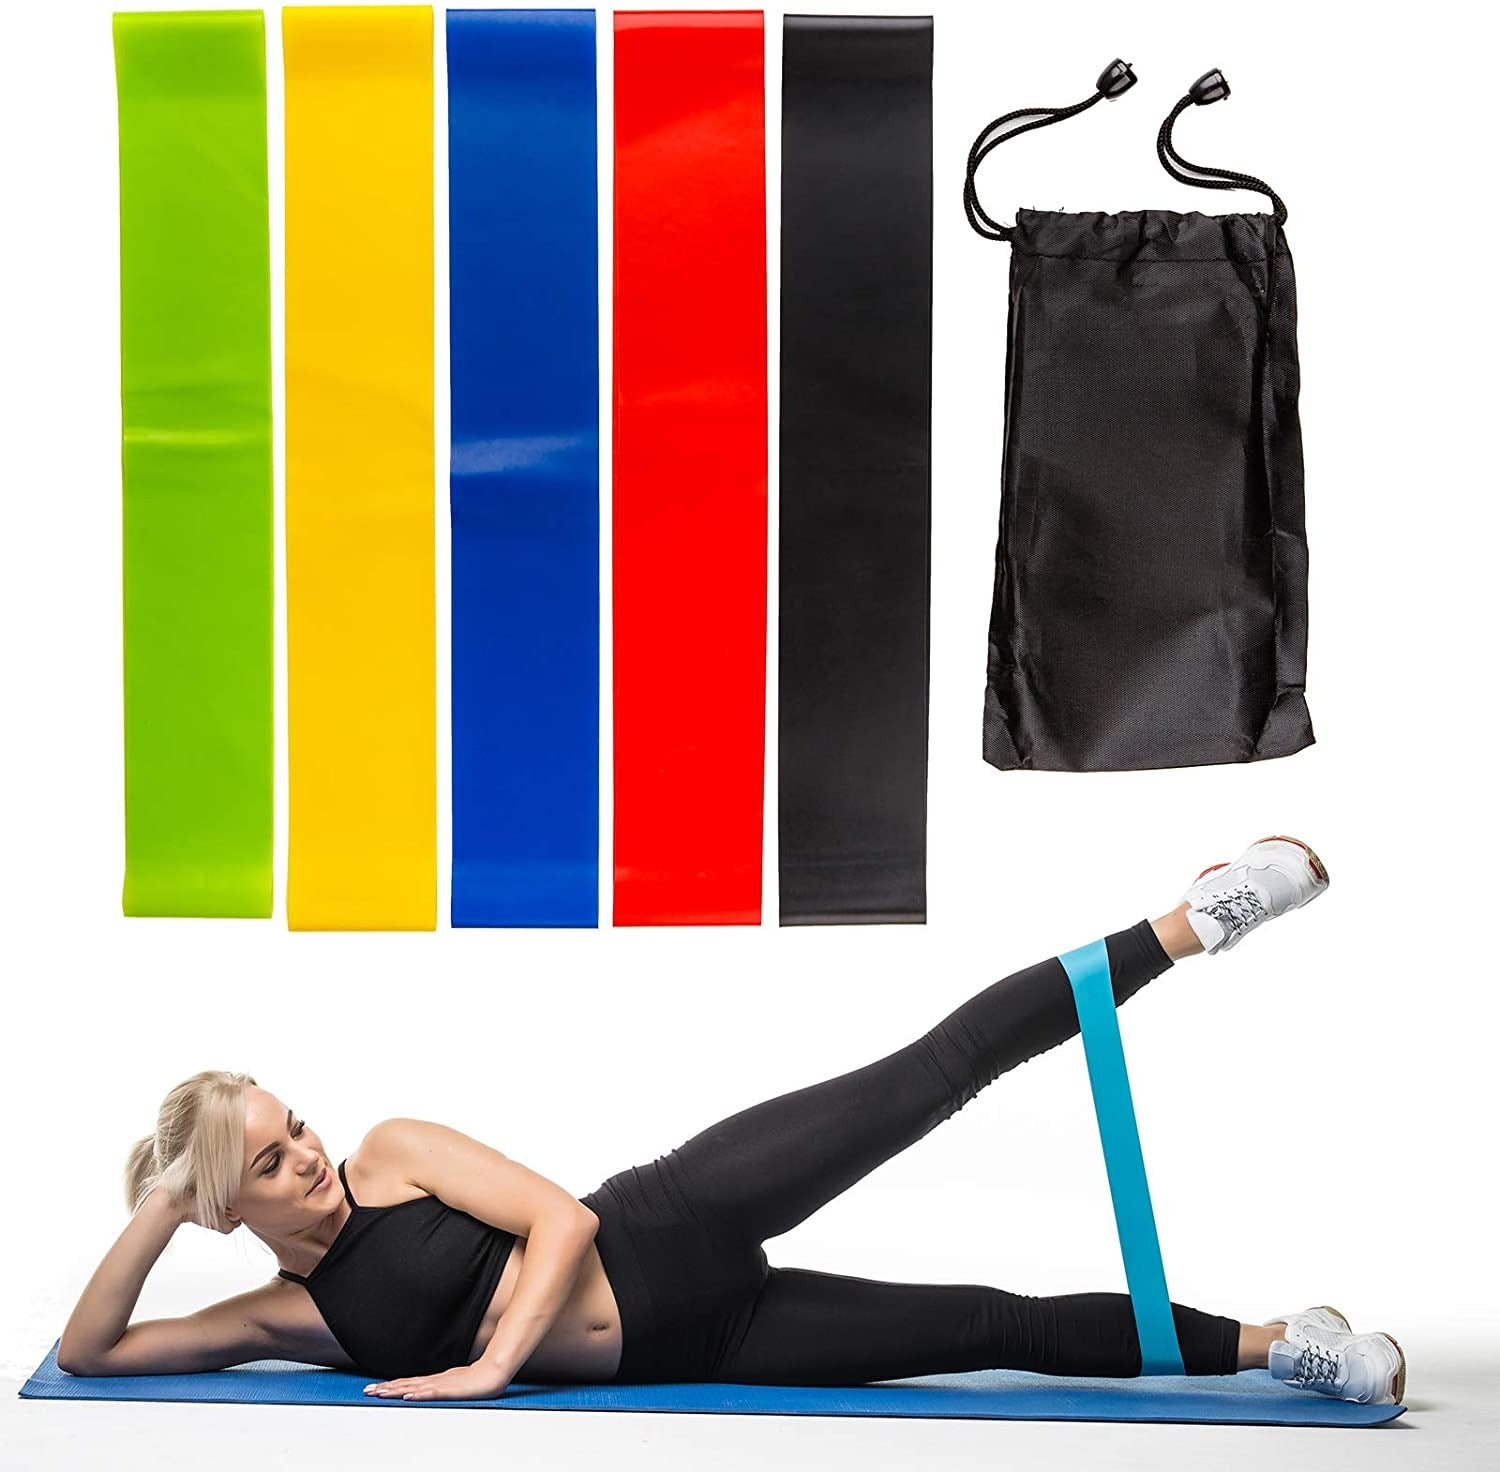 Gym Ardent Set of 5 Fabric Resistance exercsie Bands with a Multipurpose Carry Bag are a Practical and Effective Fitness Solution for use at Home Outdoors Indoors Travel or Vacation. 